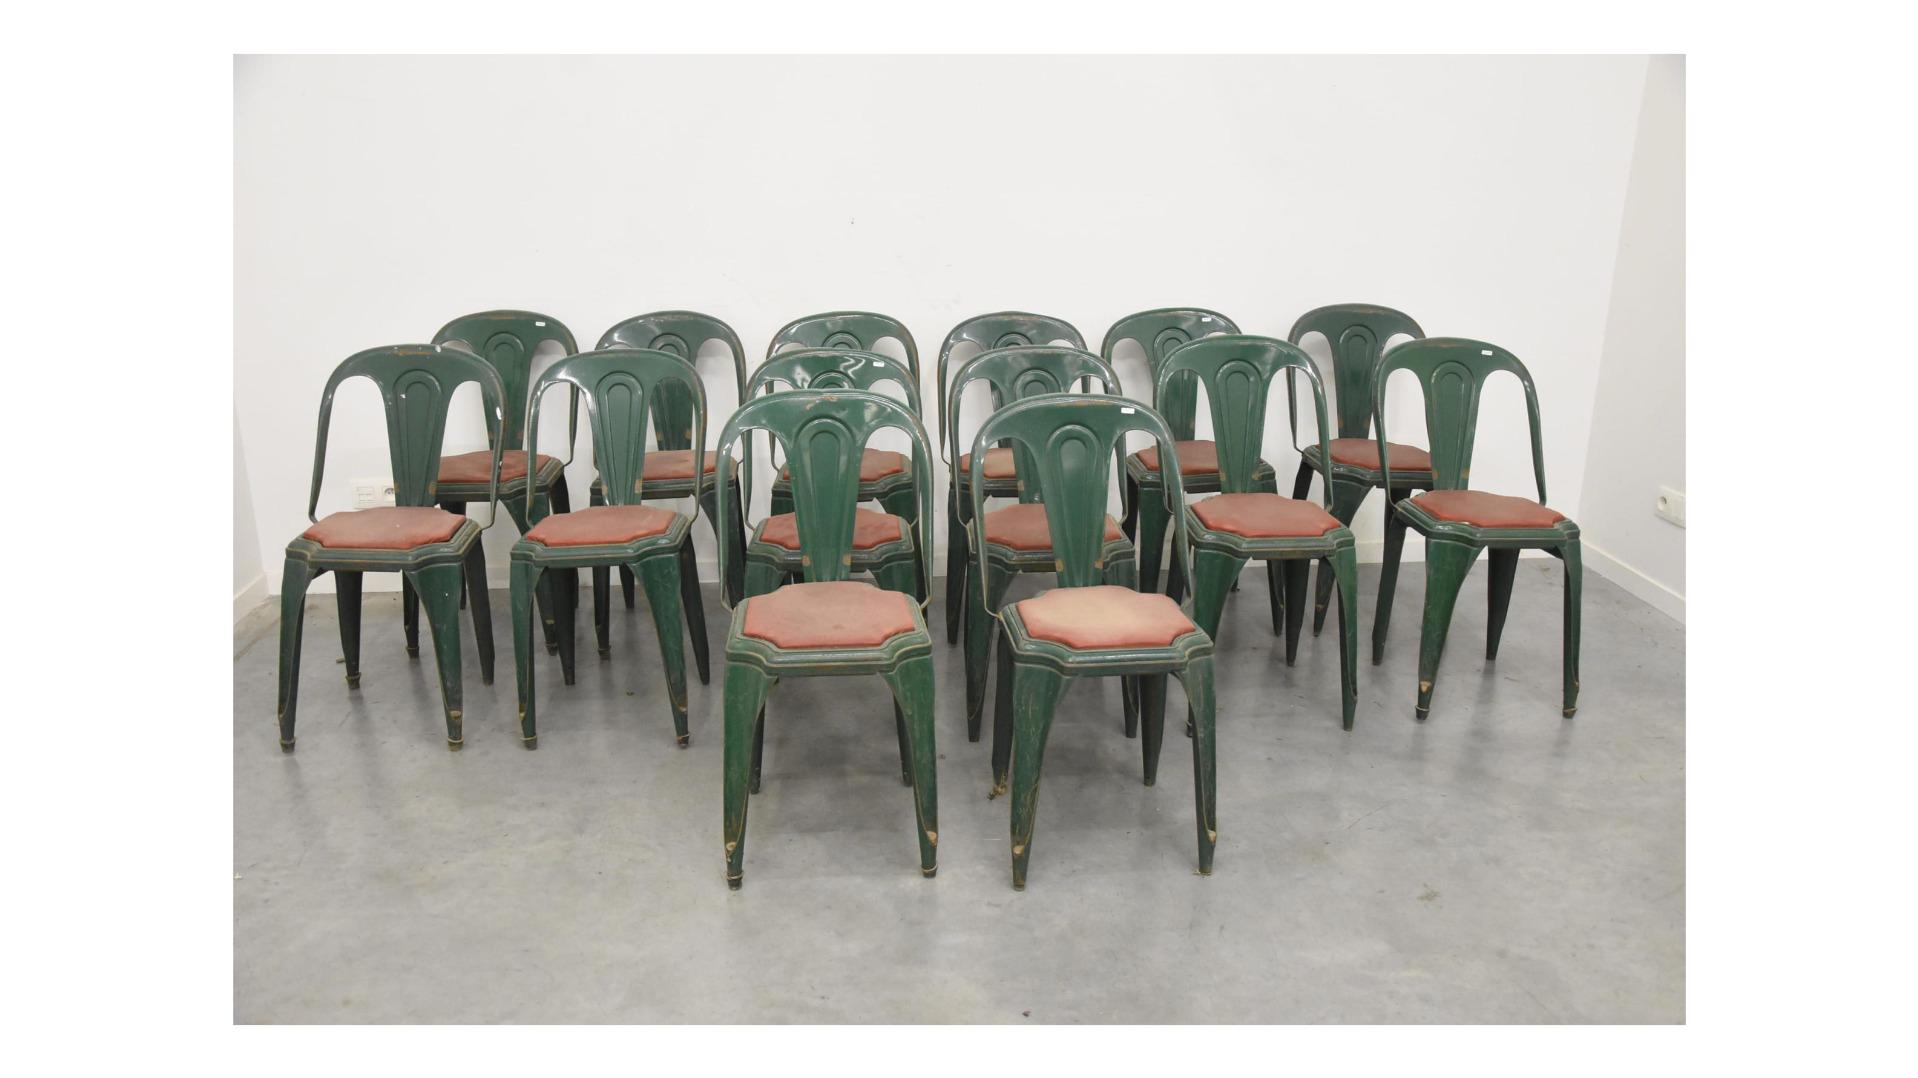 Suite of 14 industrial chairs of the fibrocit brand, circa 1950 
Normal wear, scratches, lack of peinyures, small superficial rust spots.